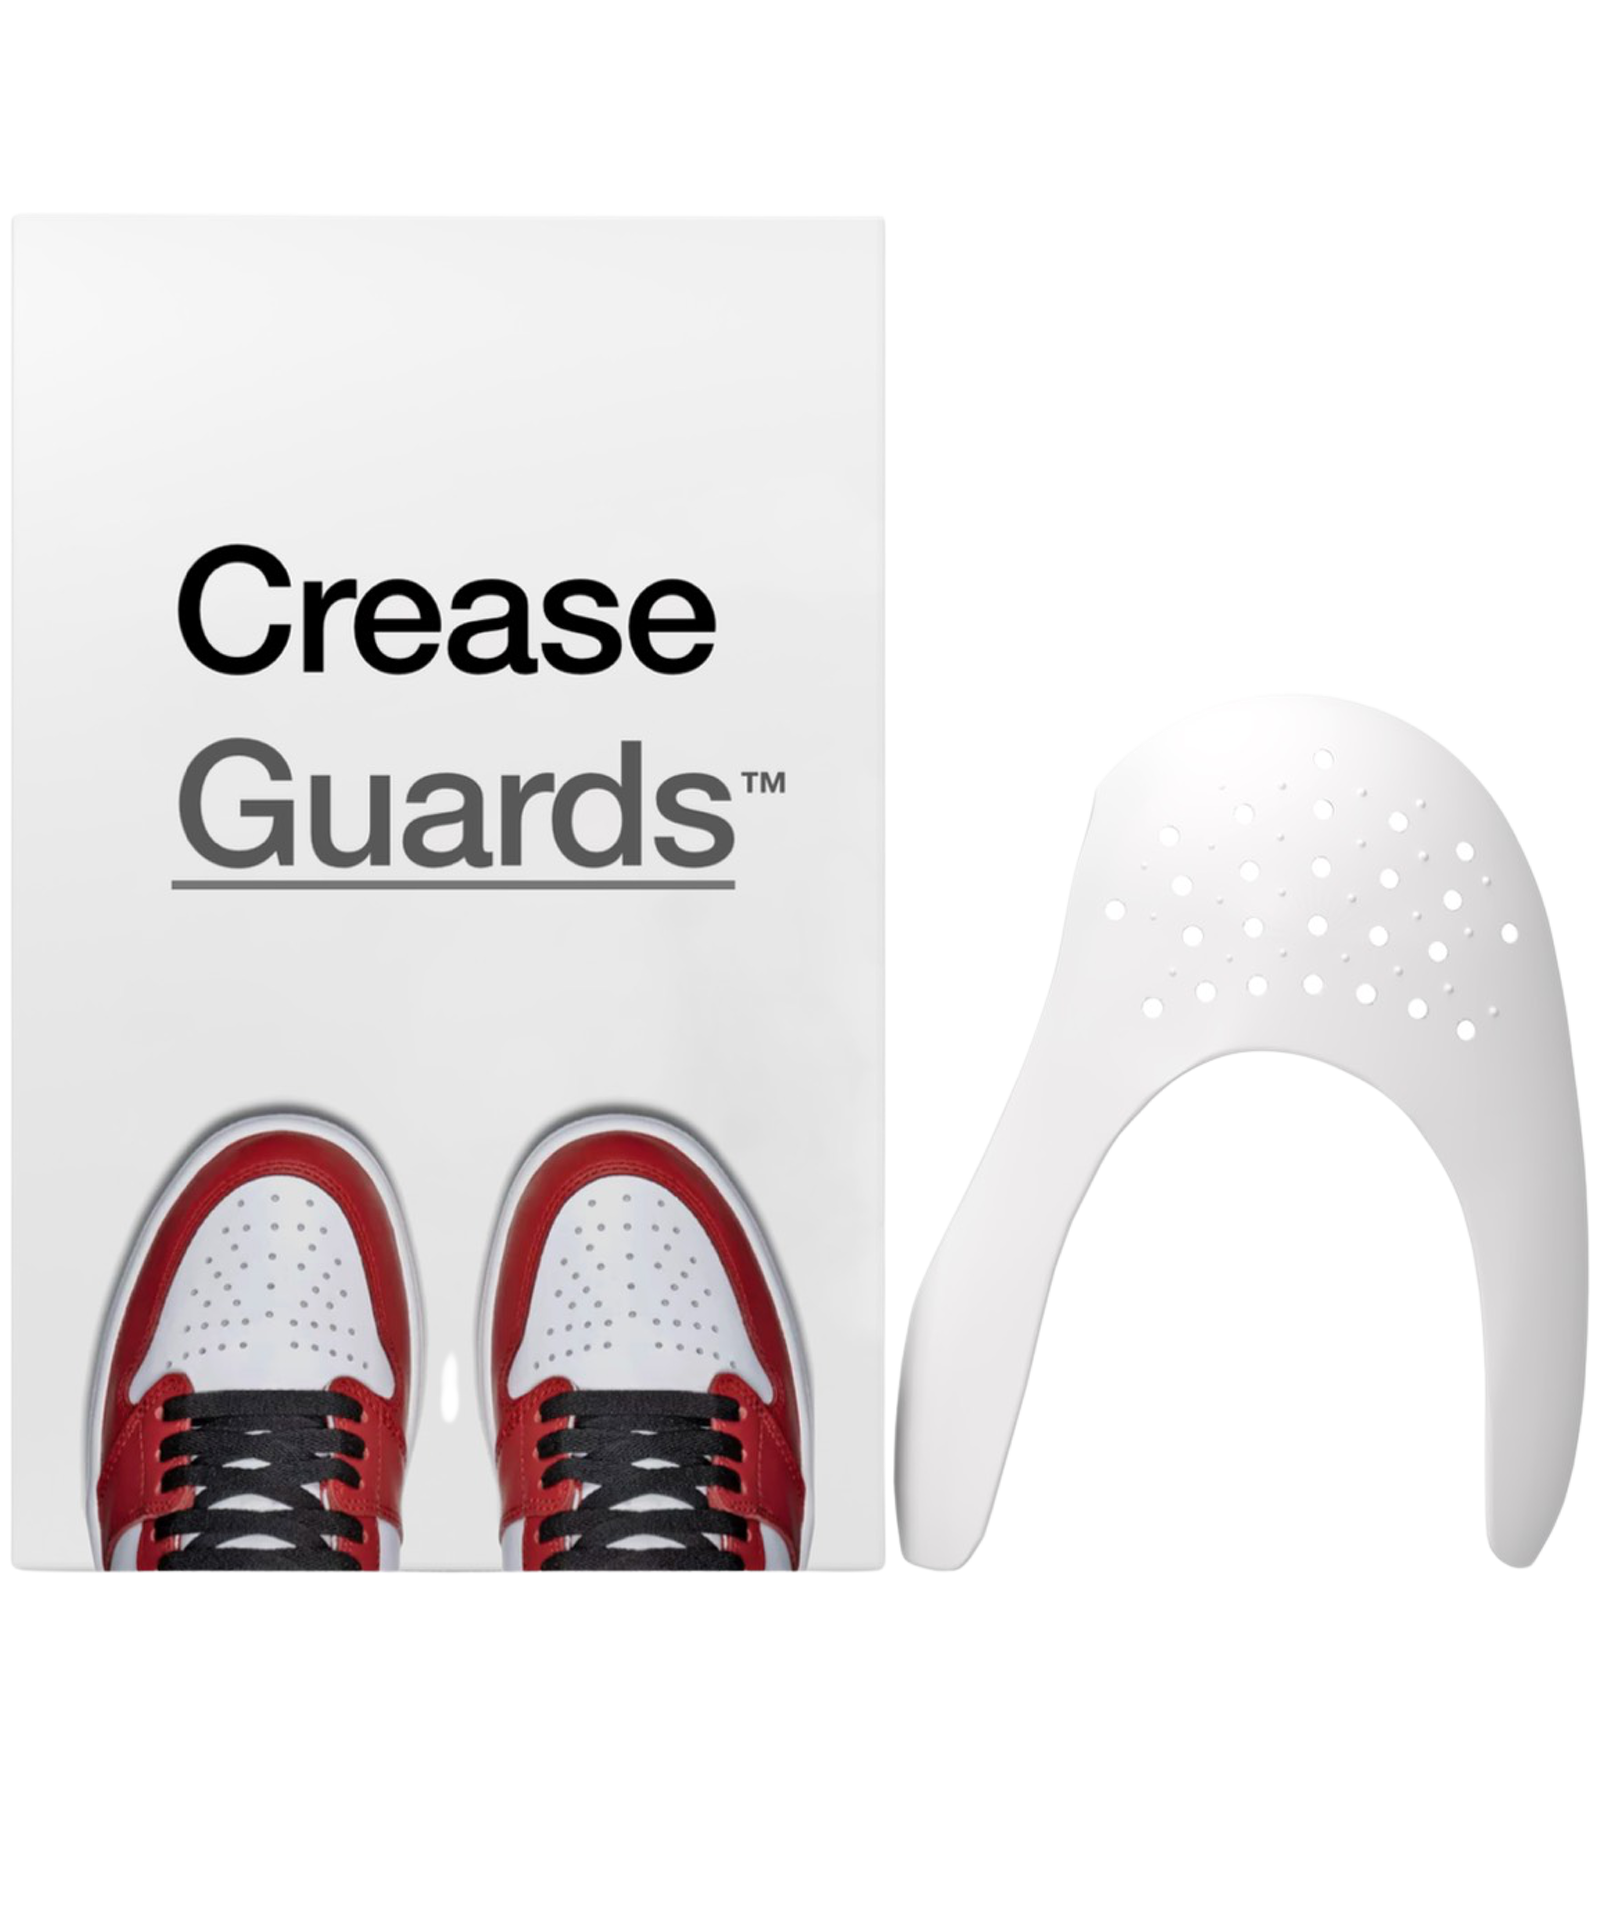  +Protect  Shoe Crease Protector Guards for Sneakers